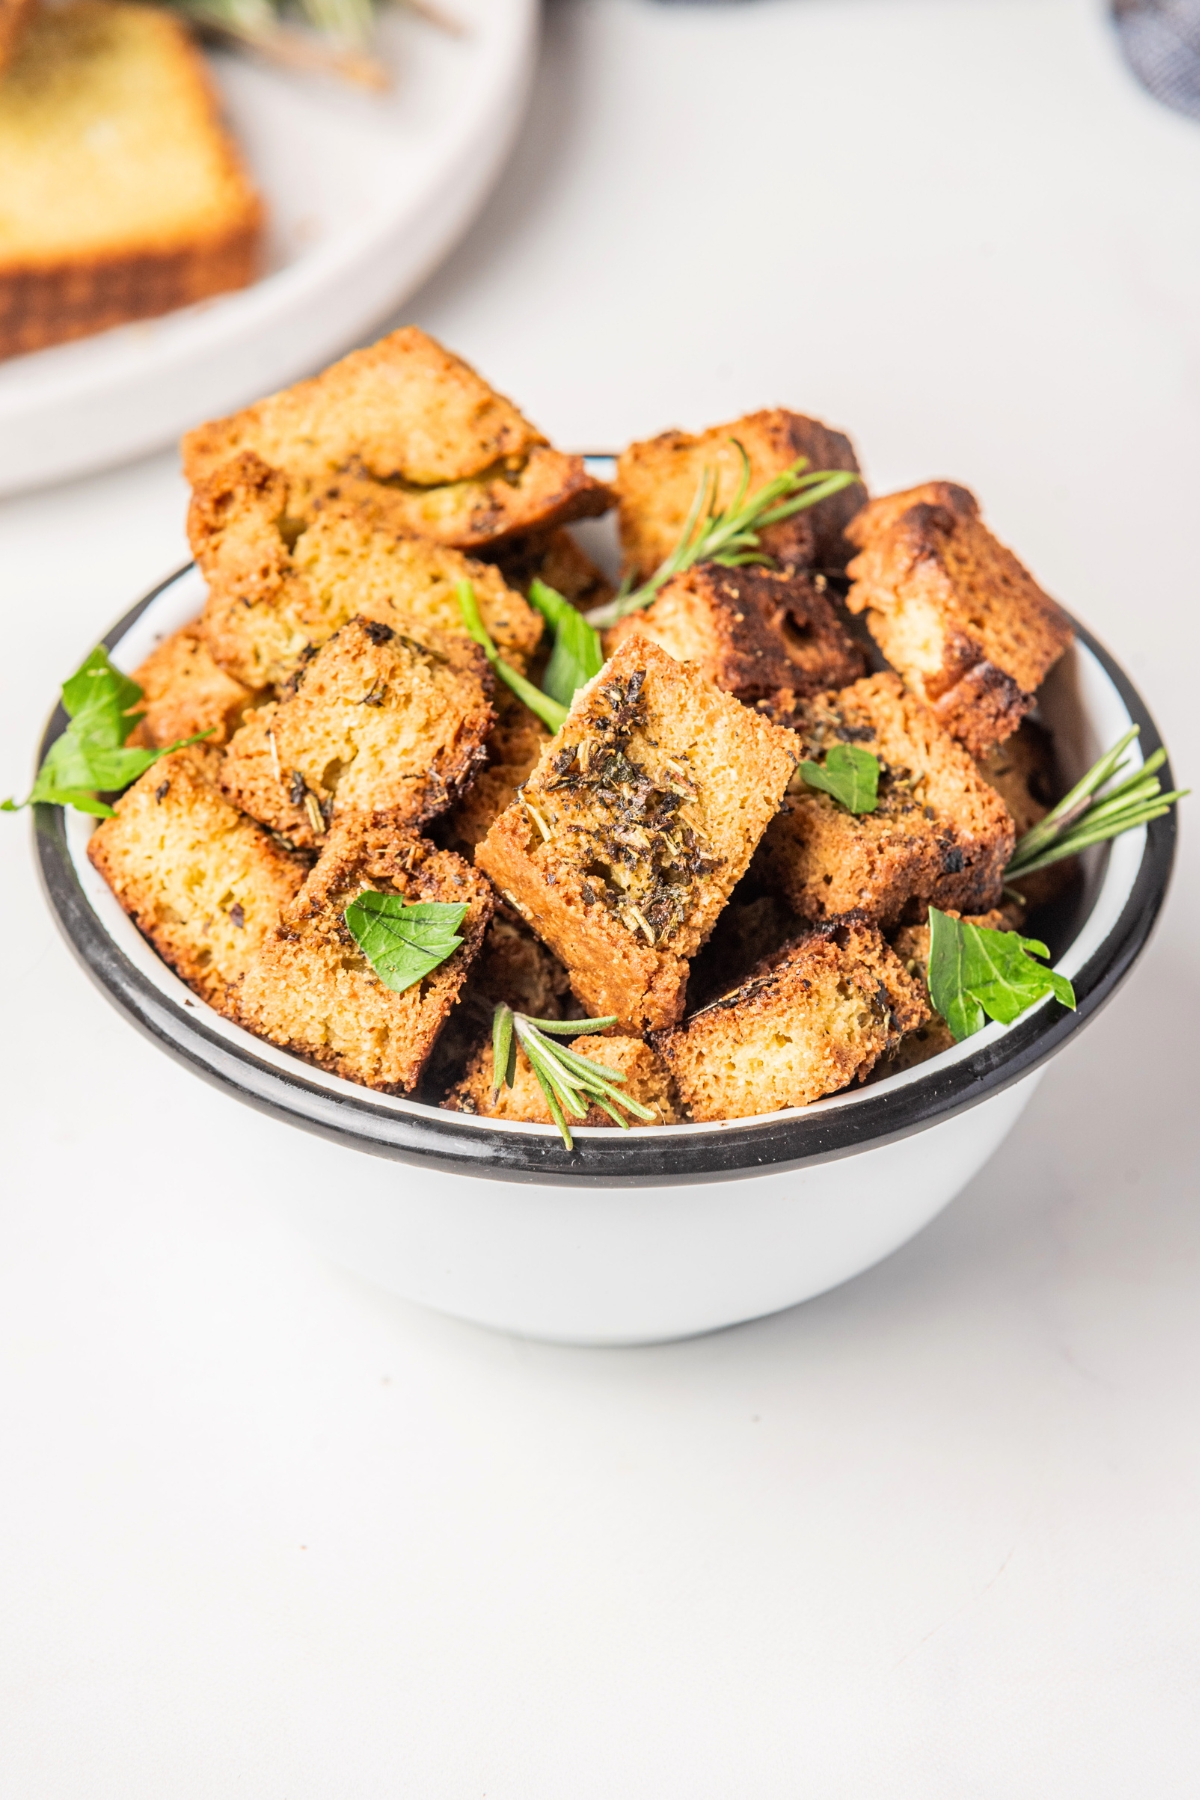 Making low carb croutons with keto bread